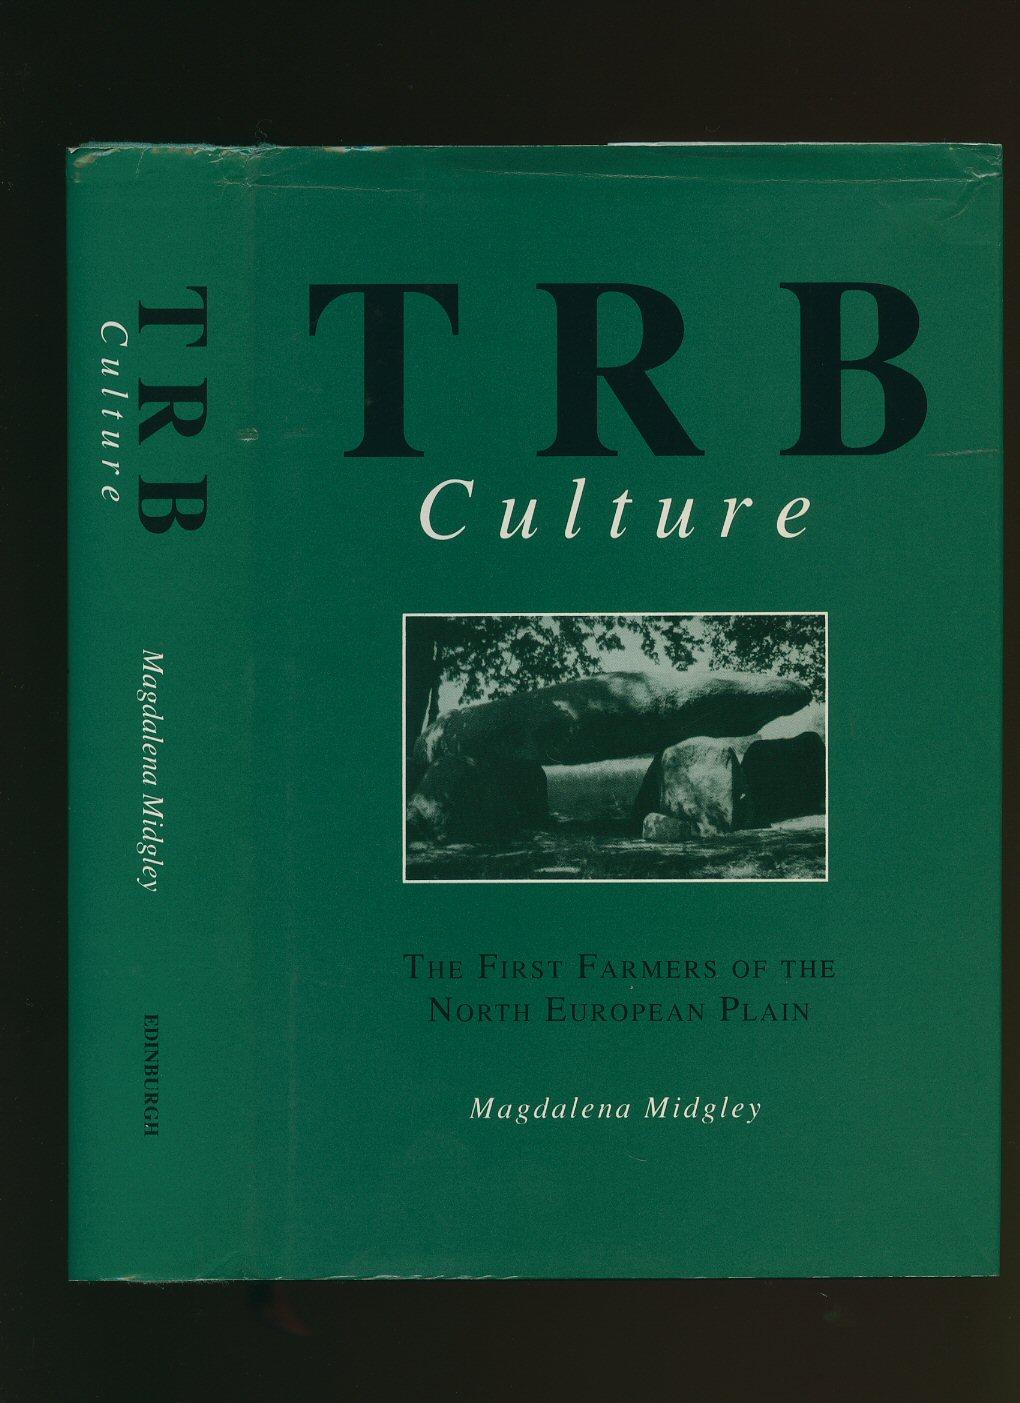 TRB Culture; The First Farmers of the North European Plain [T. R. B. or Trichterbecherkultur] Funnel-necked Beaker Culture, Neolithic Manifestation in Northern Europe - Midgley, Magdalena S.